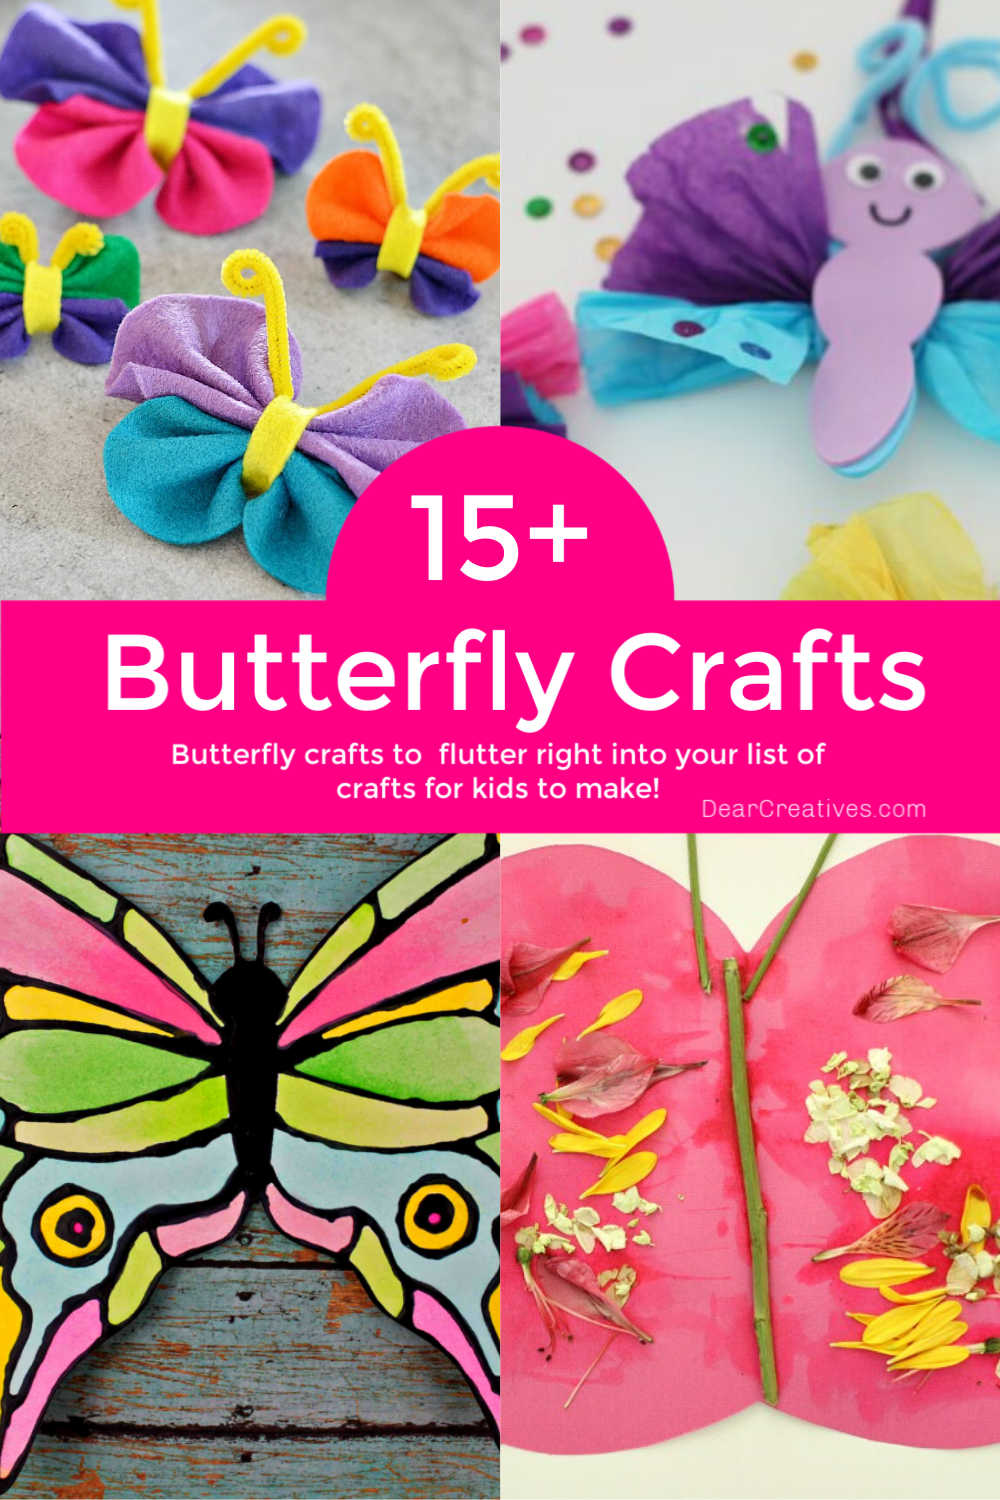 15+ Beautiful Butterfly Crafts To Brighten Your Day! Find butterfly crafts for kids, preschoolers and kids at heart to make. Fun and easy! DearCreatives.com